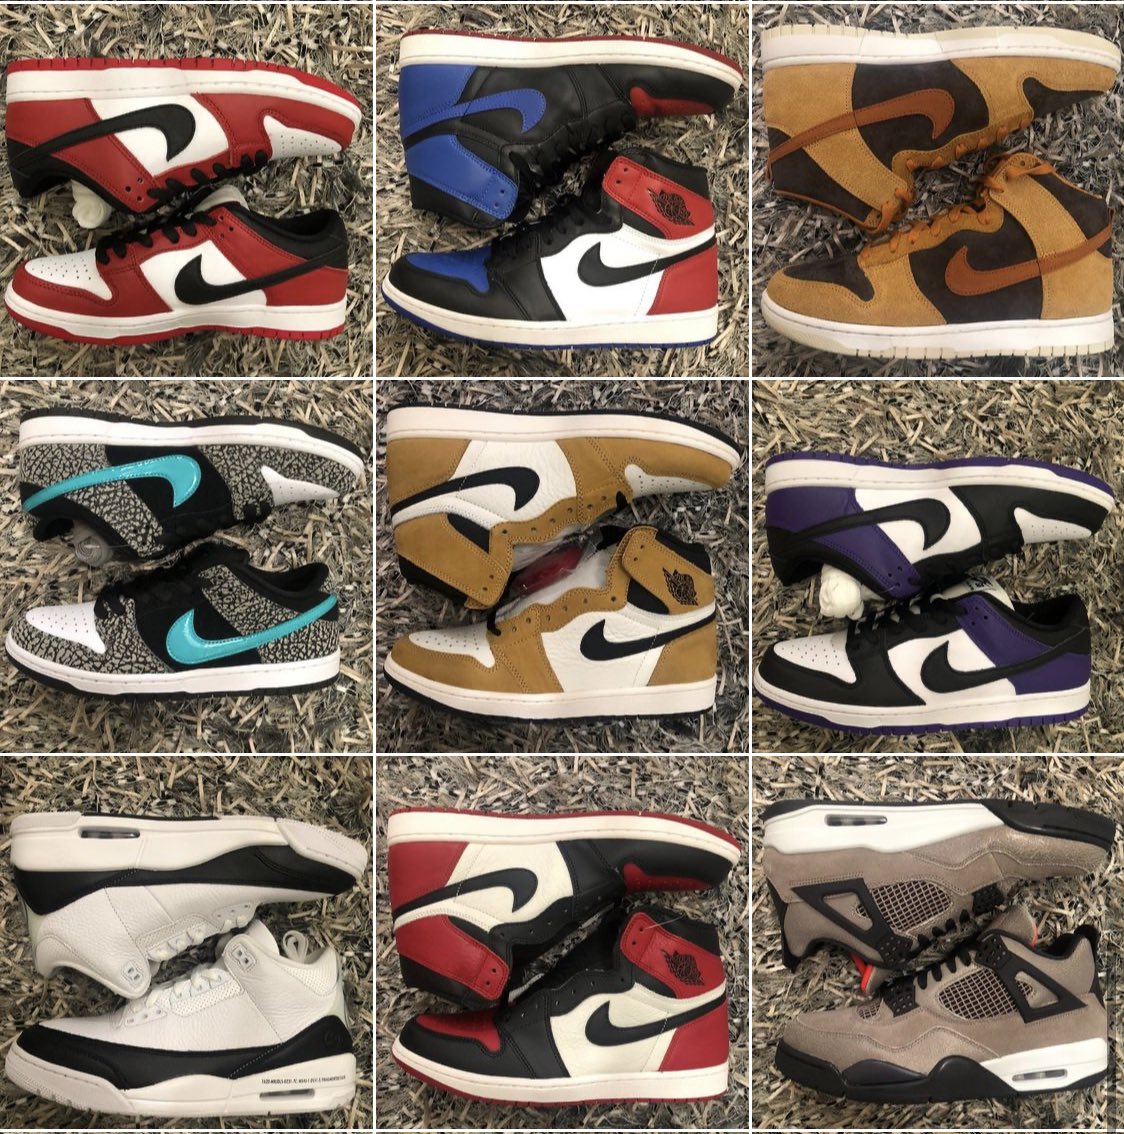 Demand is, well, how much demand there is for the sneaker(Okay, that’s simplifying)Demand is harder to predict, because taste and fashion always changeMy bread and butter are Jordan’s (especially Jordan 1), Nike Dunks, Yeezy and any special collaborations